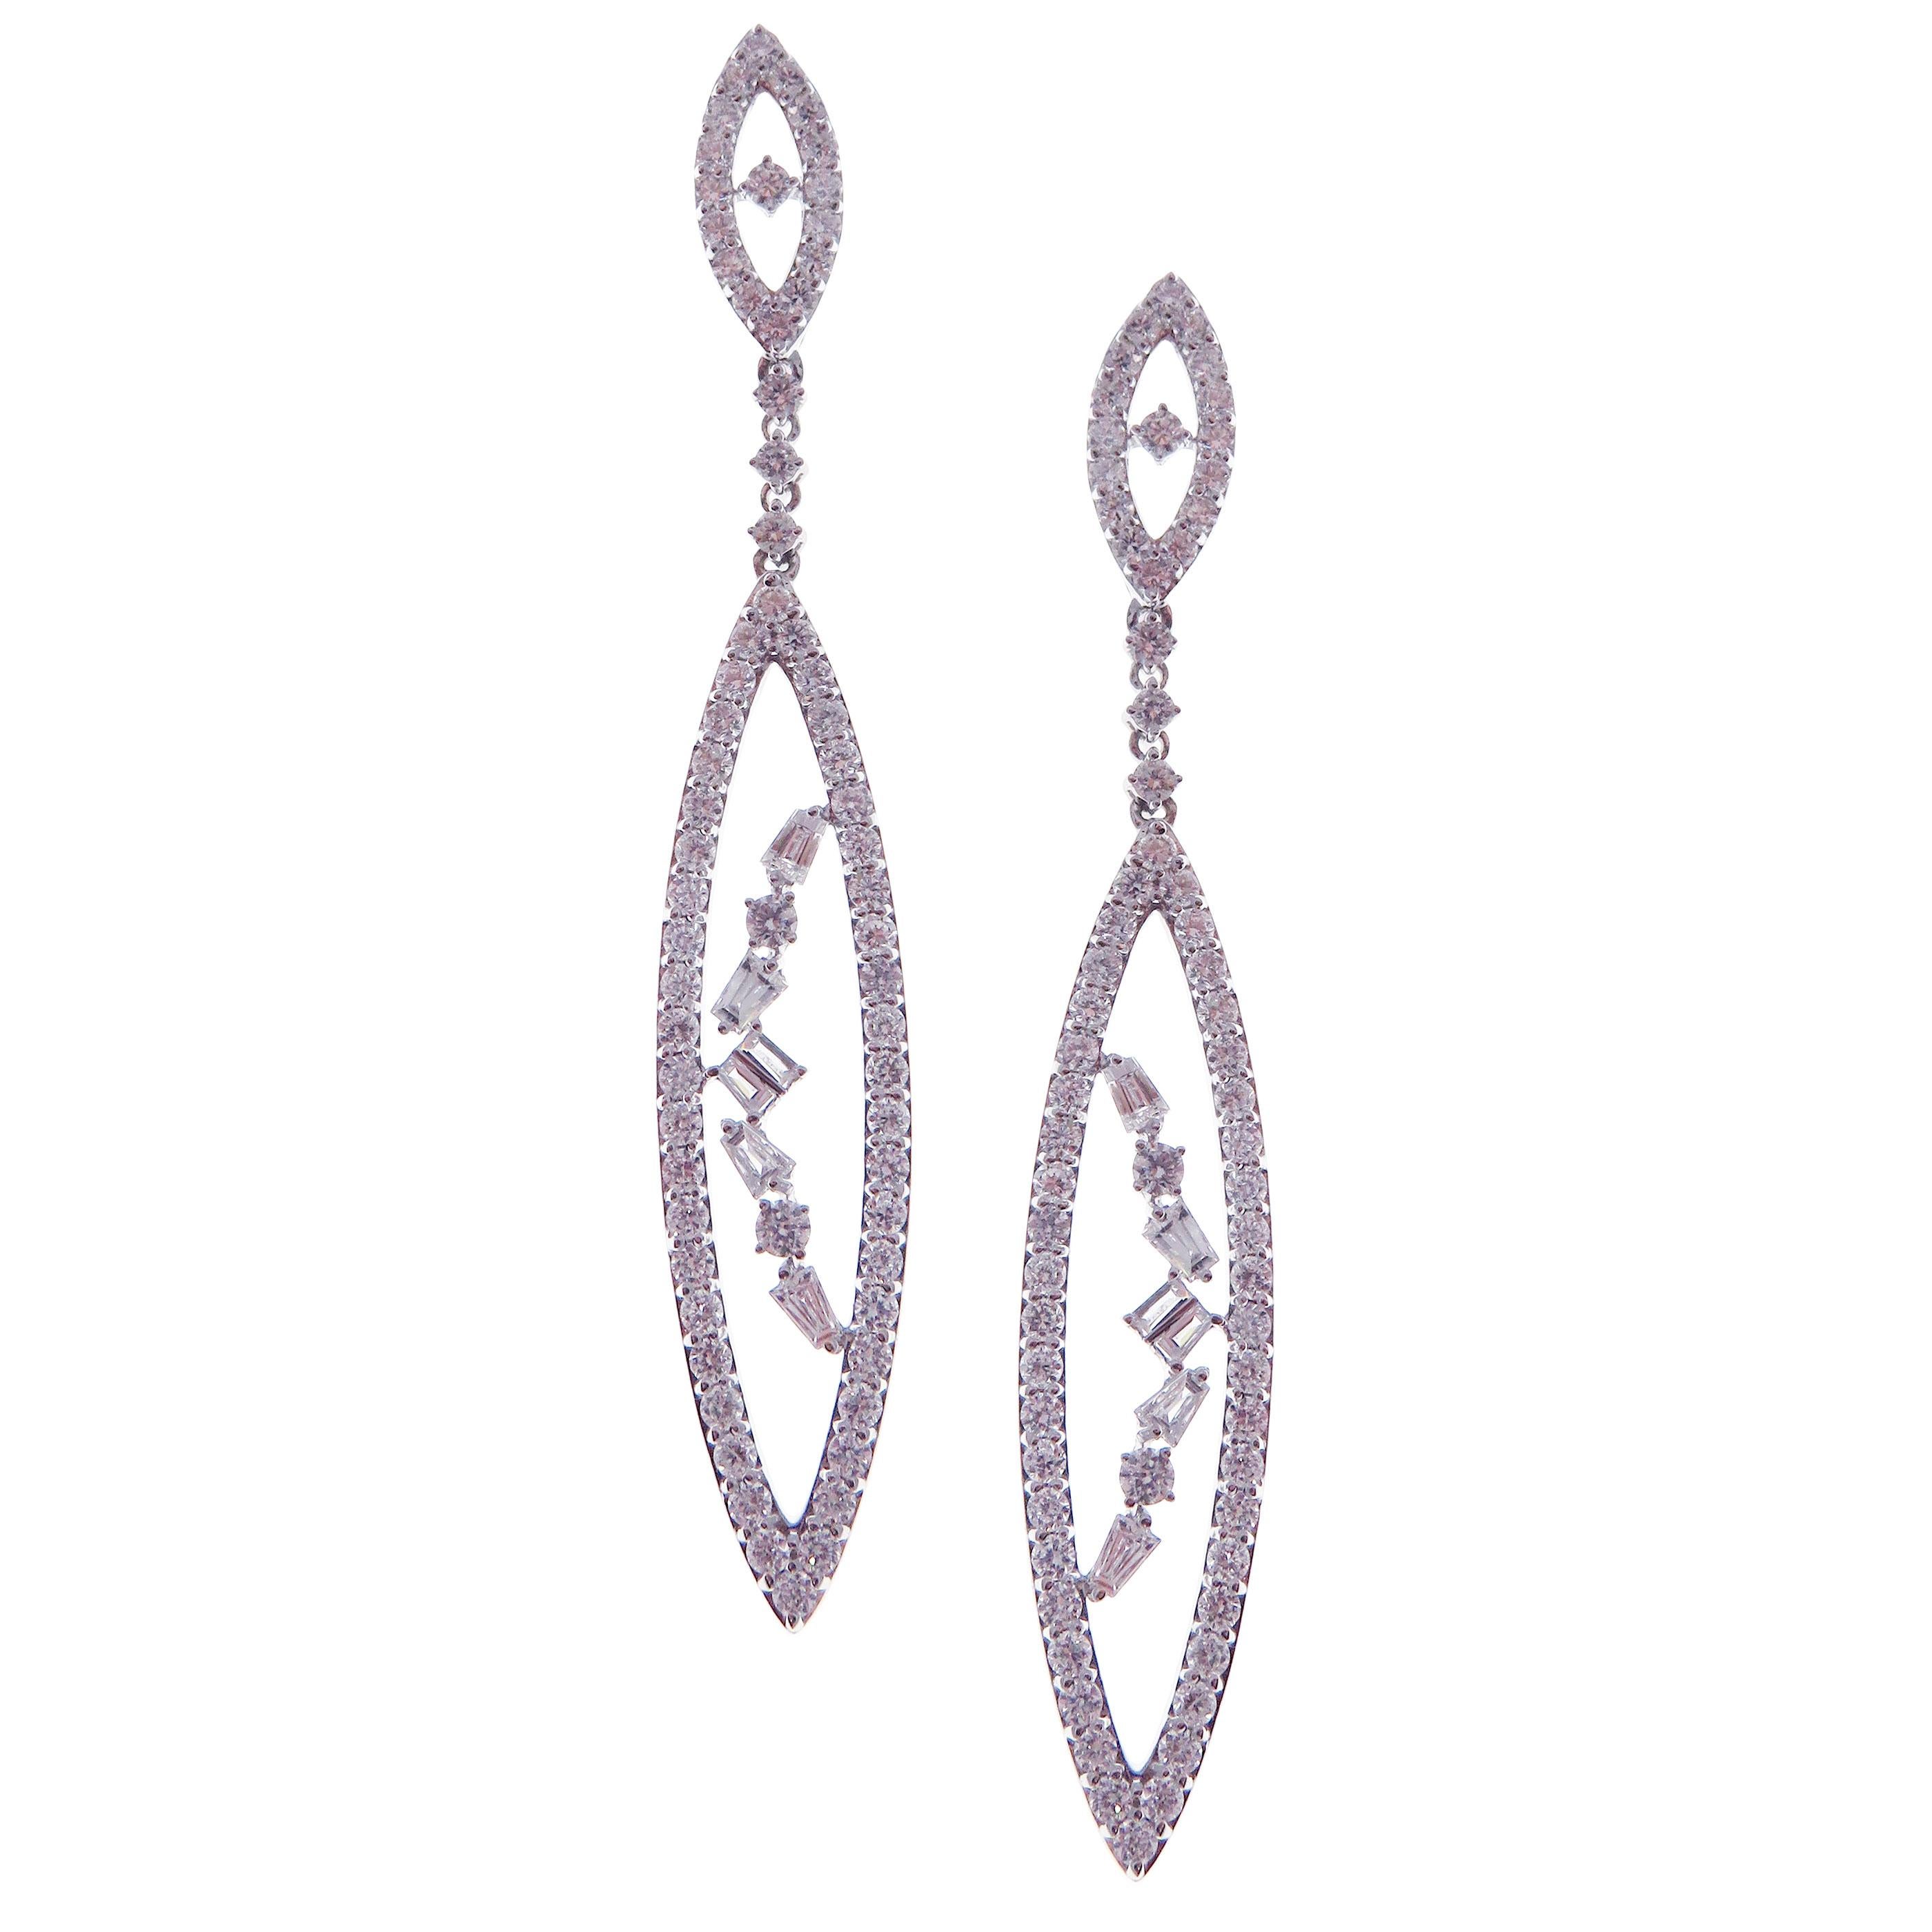 These symmetrical dangling diamond earrings are crafted in 18-karat white gold, featuring 132 round white diamonds totaling of 2.70 carats and 12 baguette white diamonds totaling of 0.55 carats.
Approximate total weight 7.78 grams.
These earrings